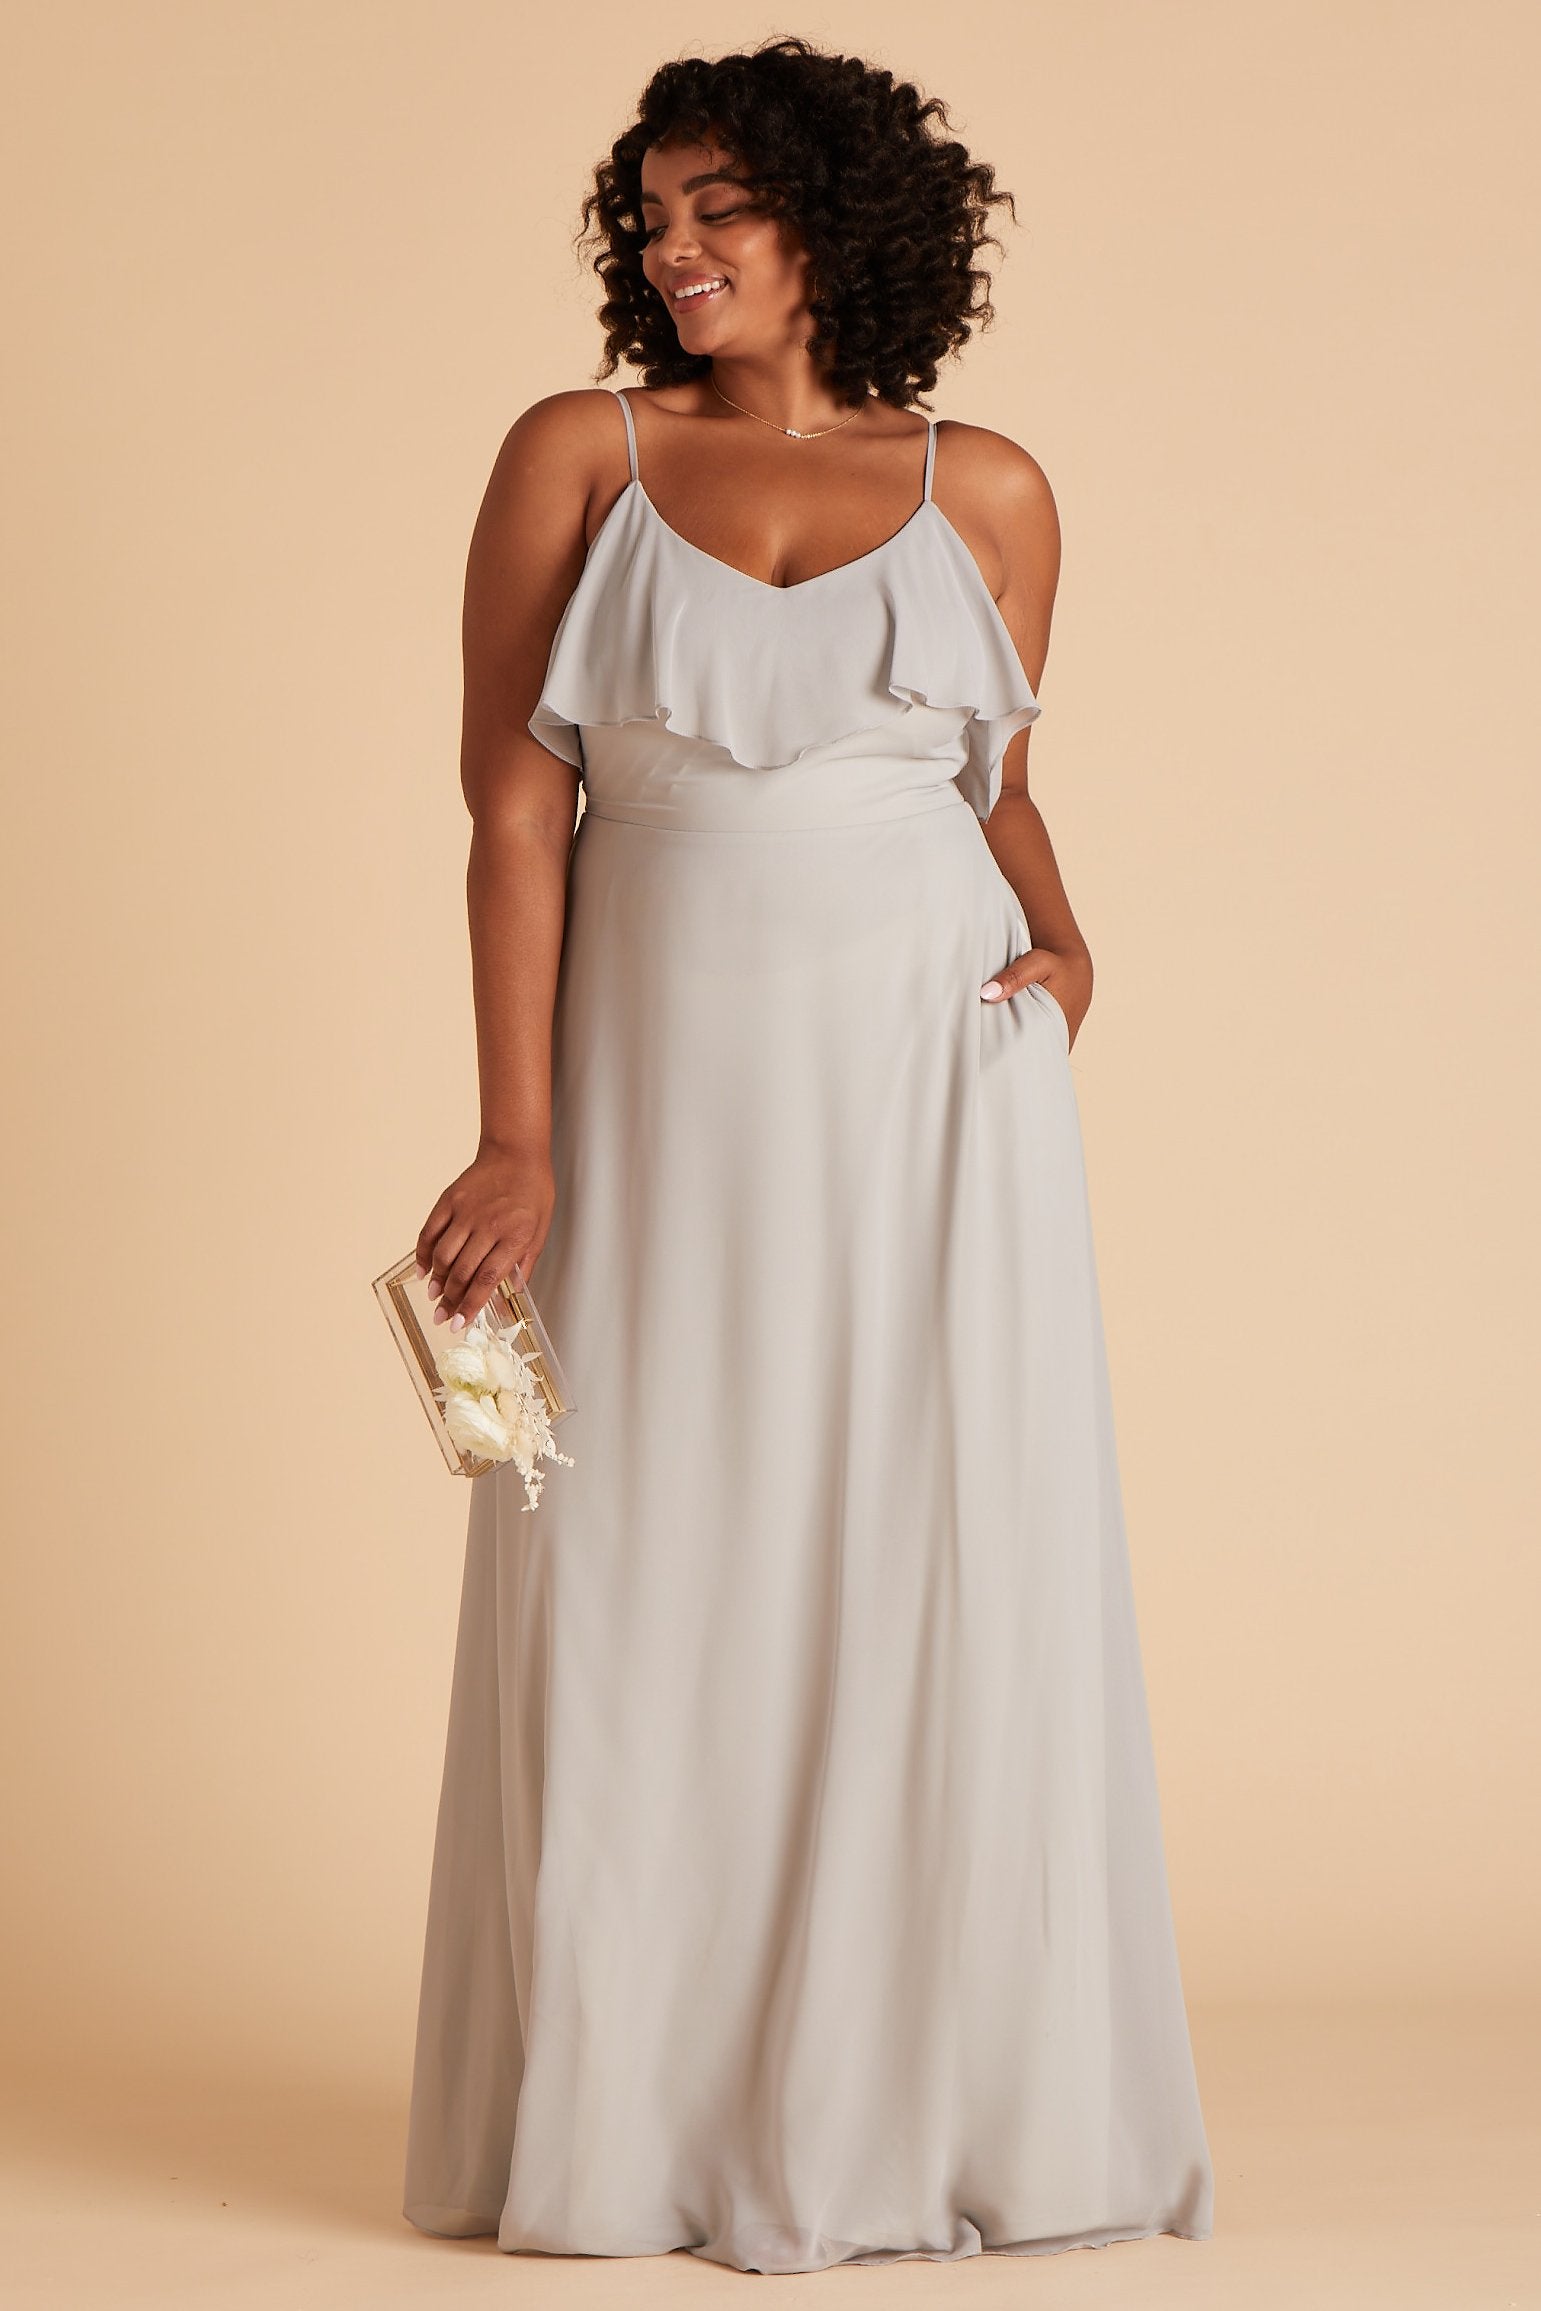 Jane convertible plus size bridesmaid dress in dove gray chiffon by Birdy Grey, front view with hand in pocket